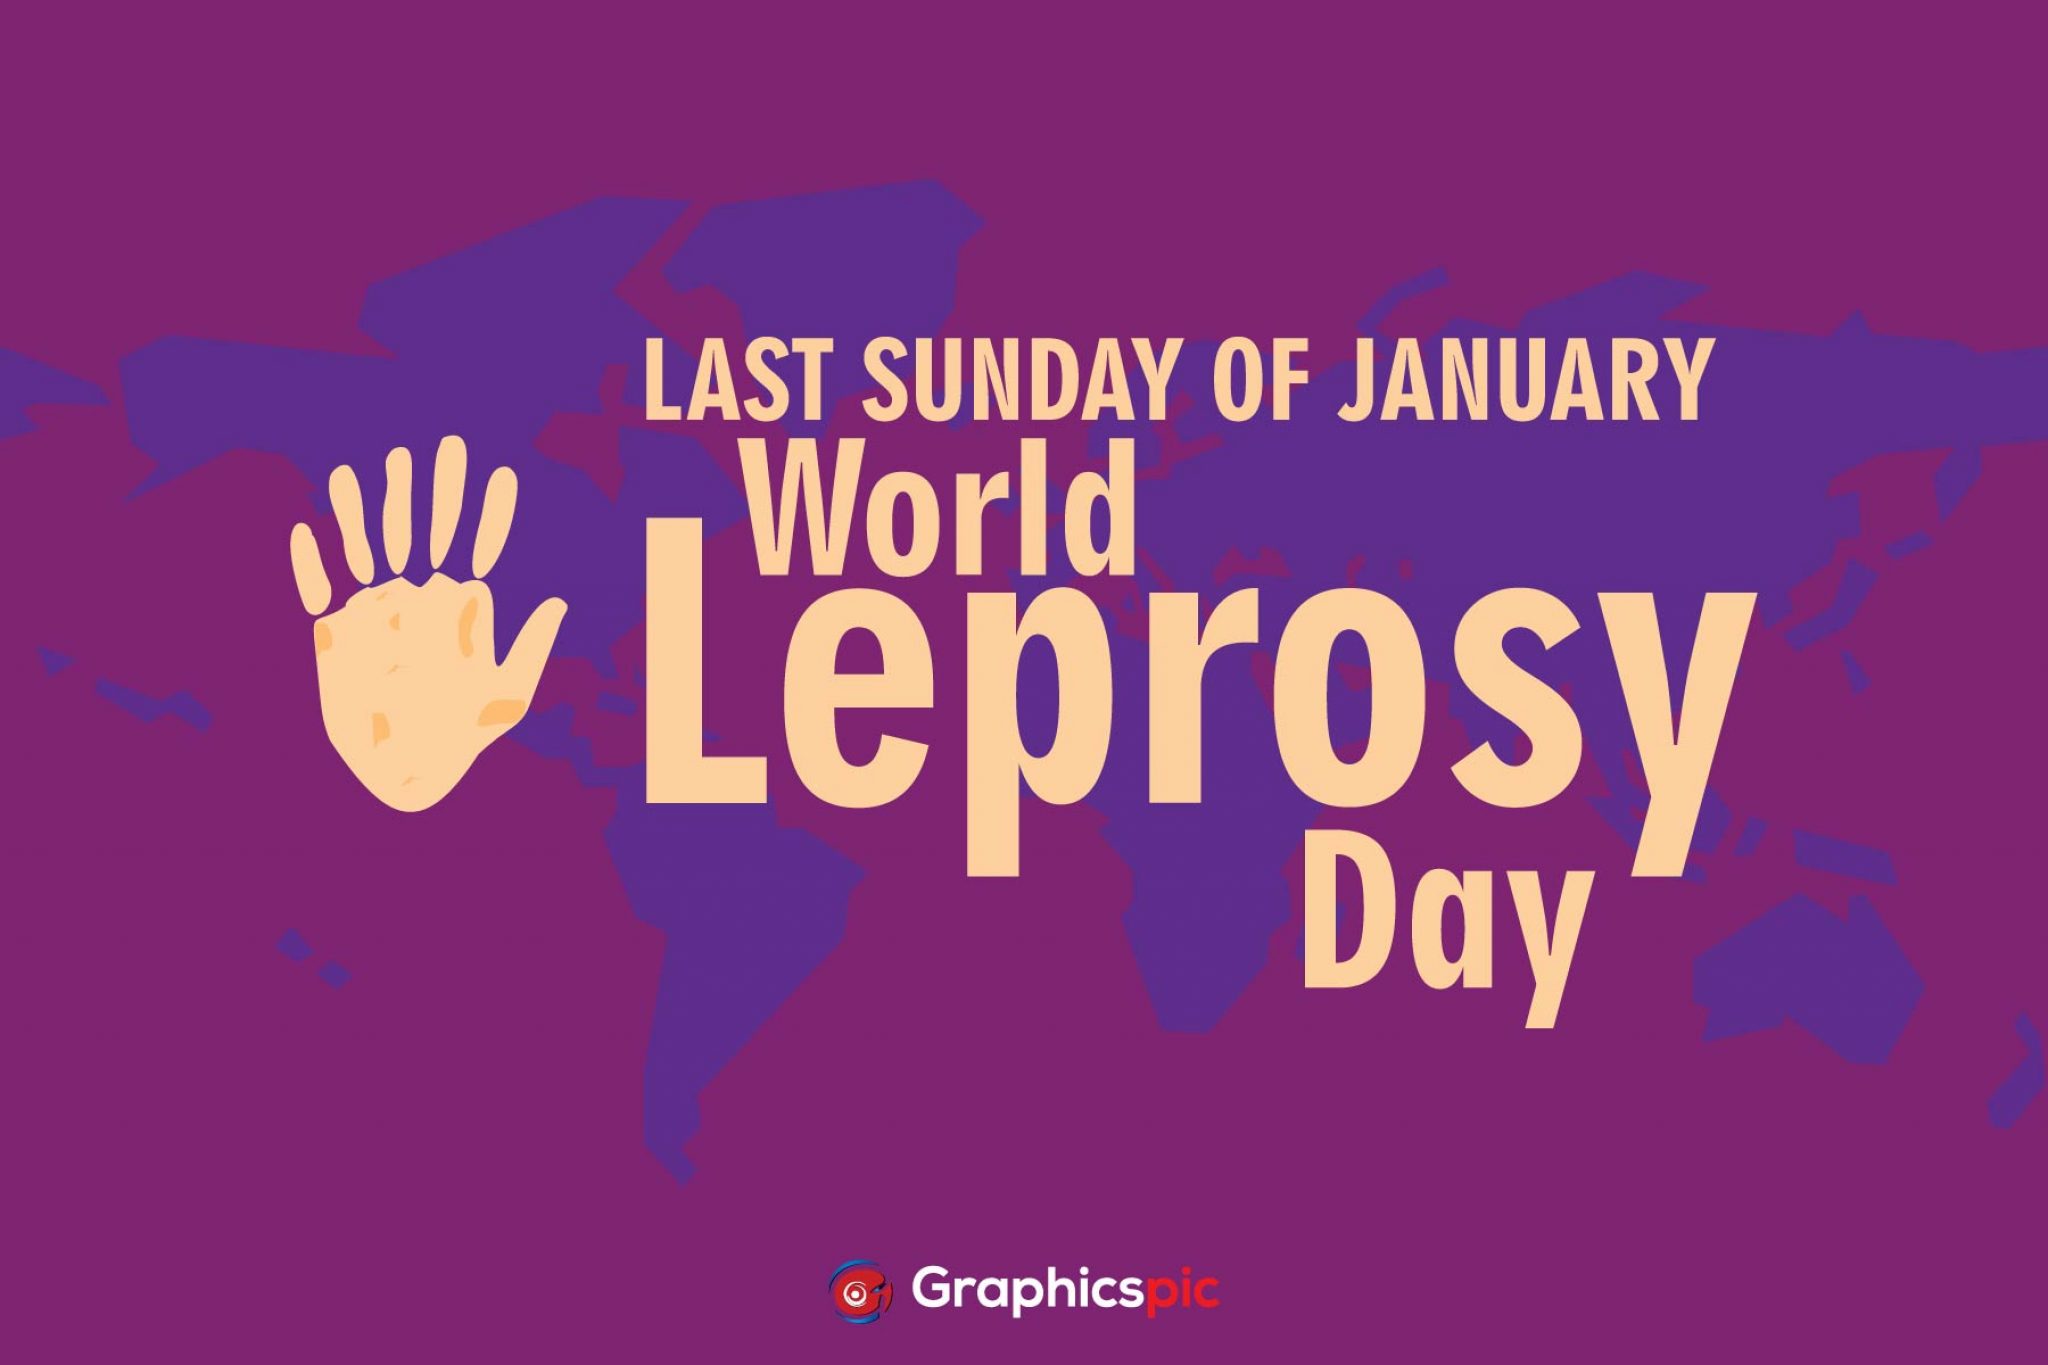 World leprosy day poster vector image free vector Graphics Pic